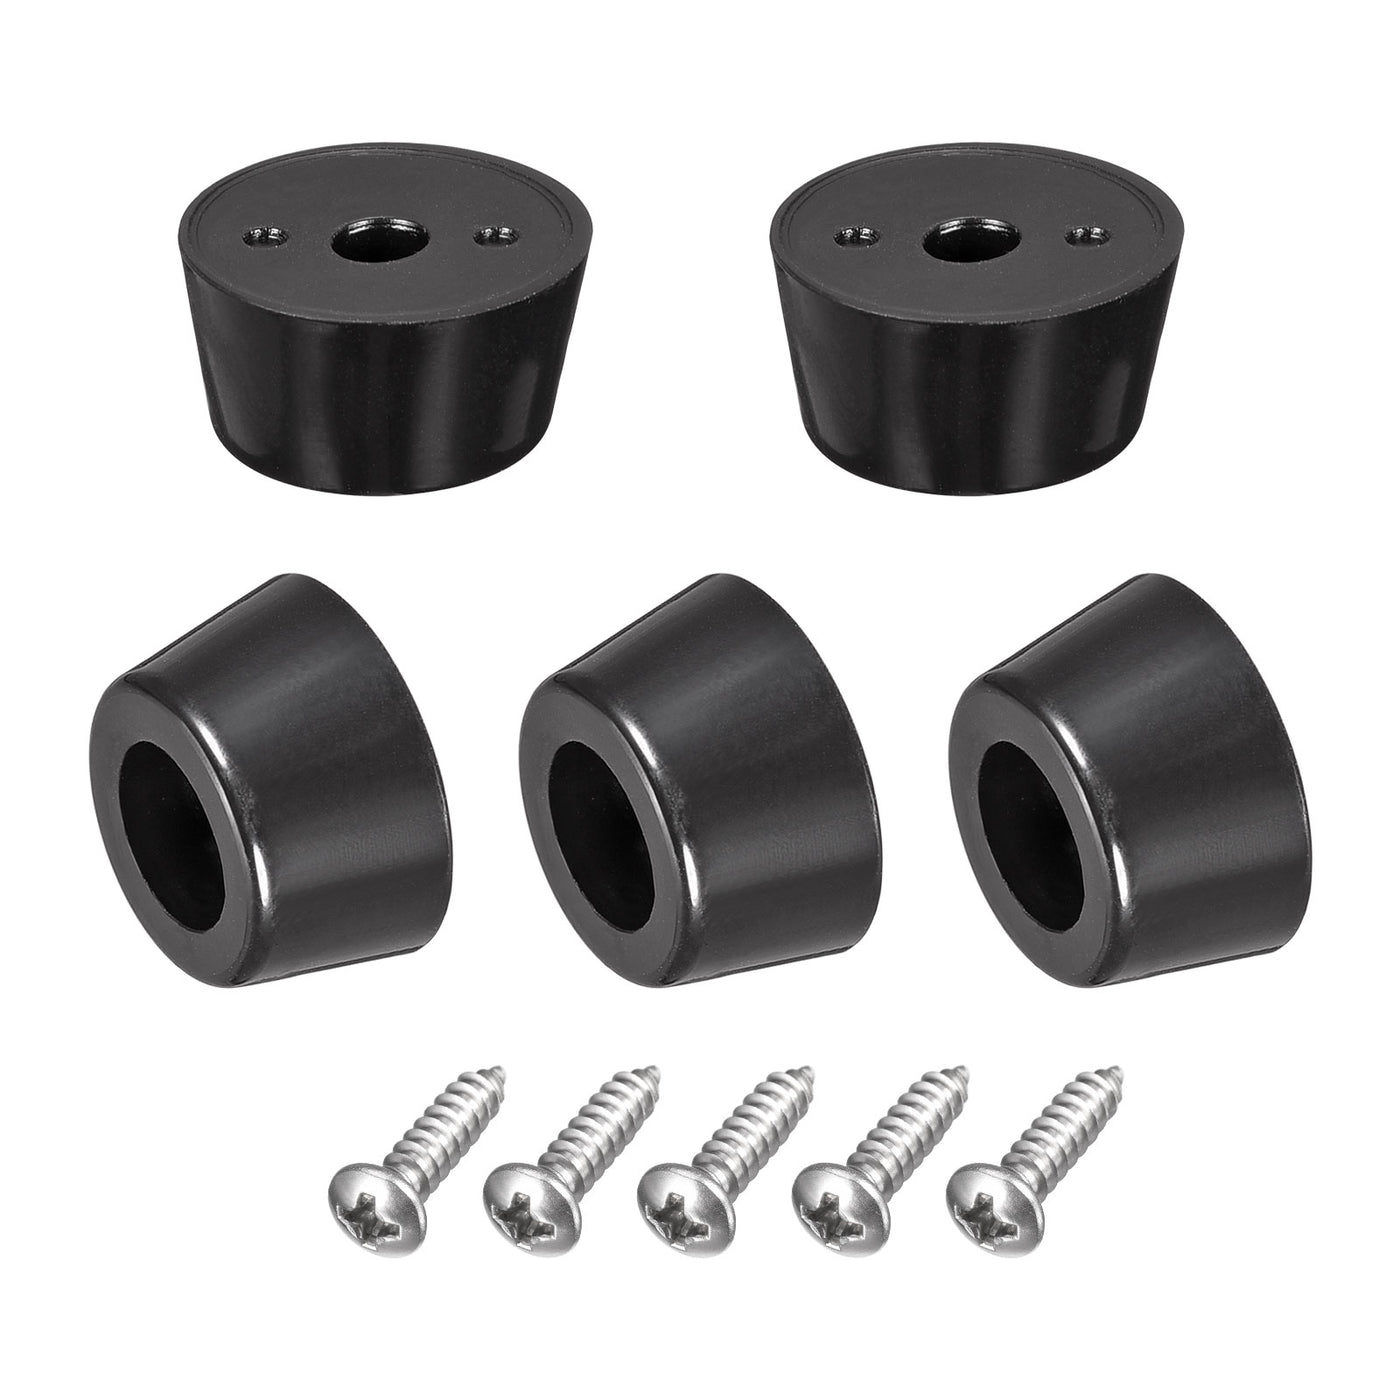 uxcell Uxcell 15mm W x 7mm H Rubber Bumper Feet, Stainless Steel Screws and Washer 16pcs